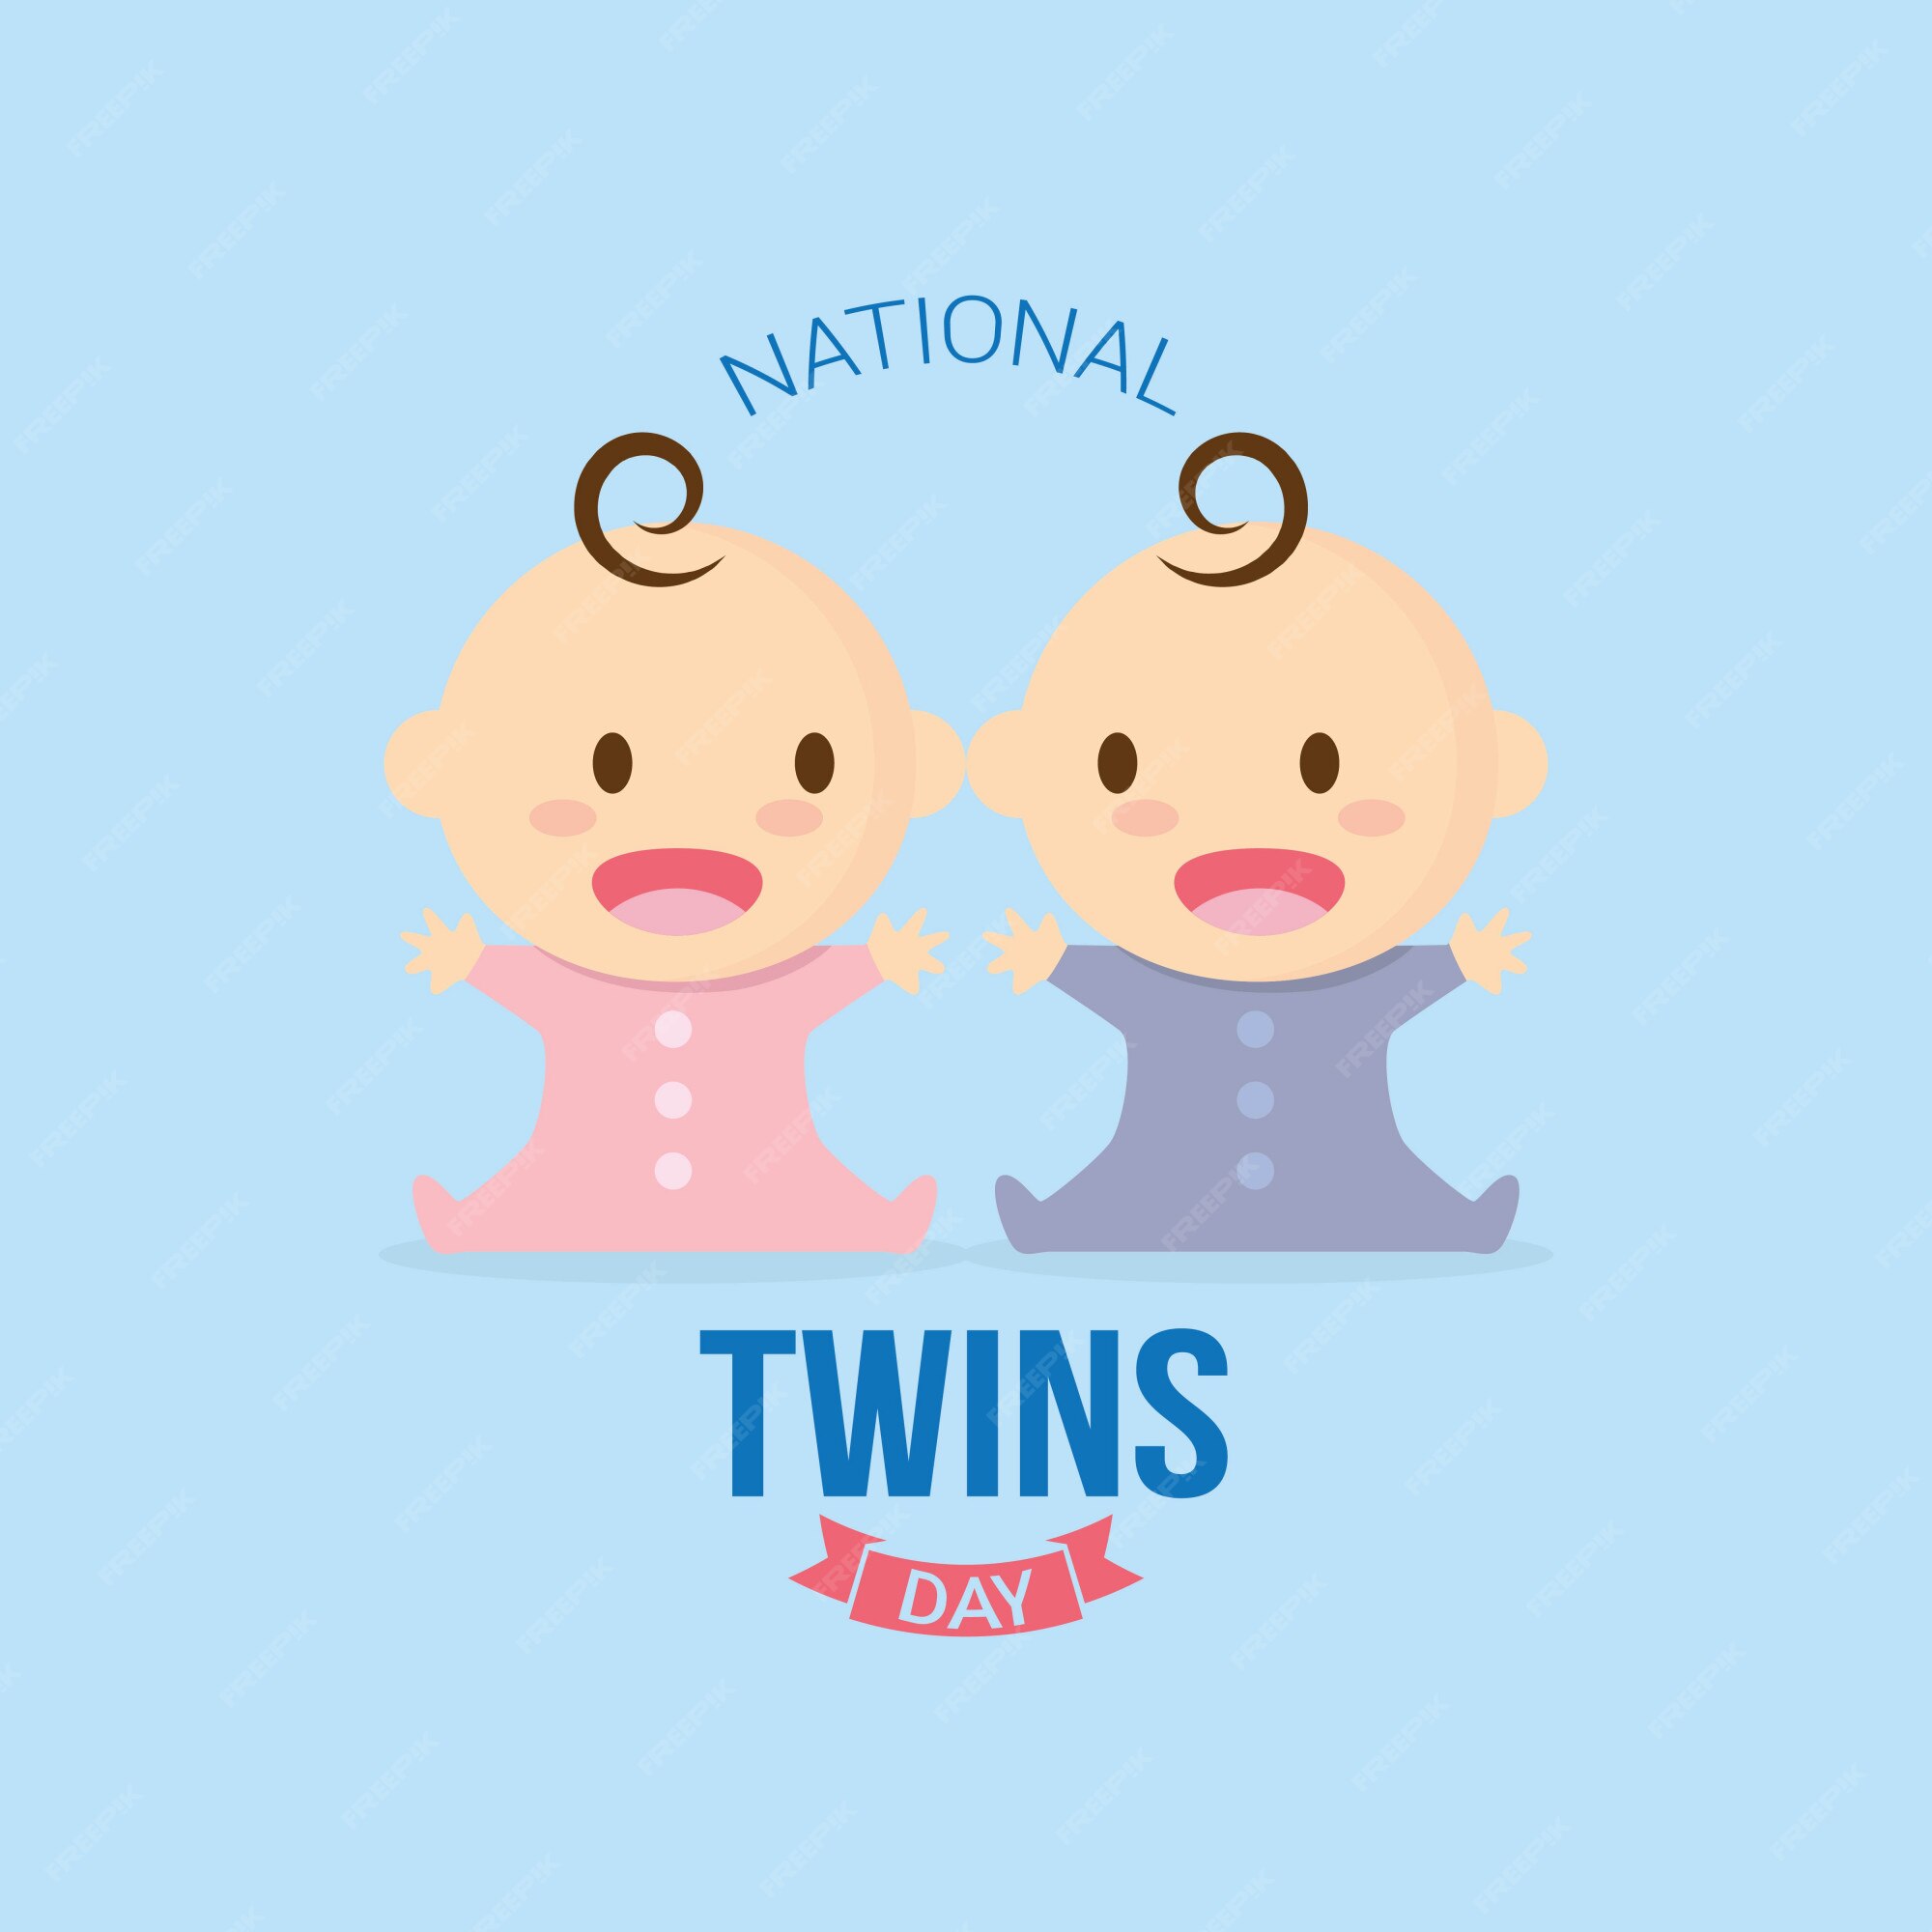 Premium Vector National twins day